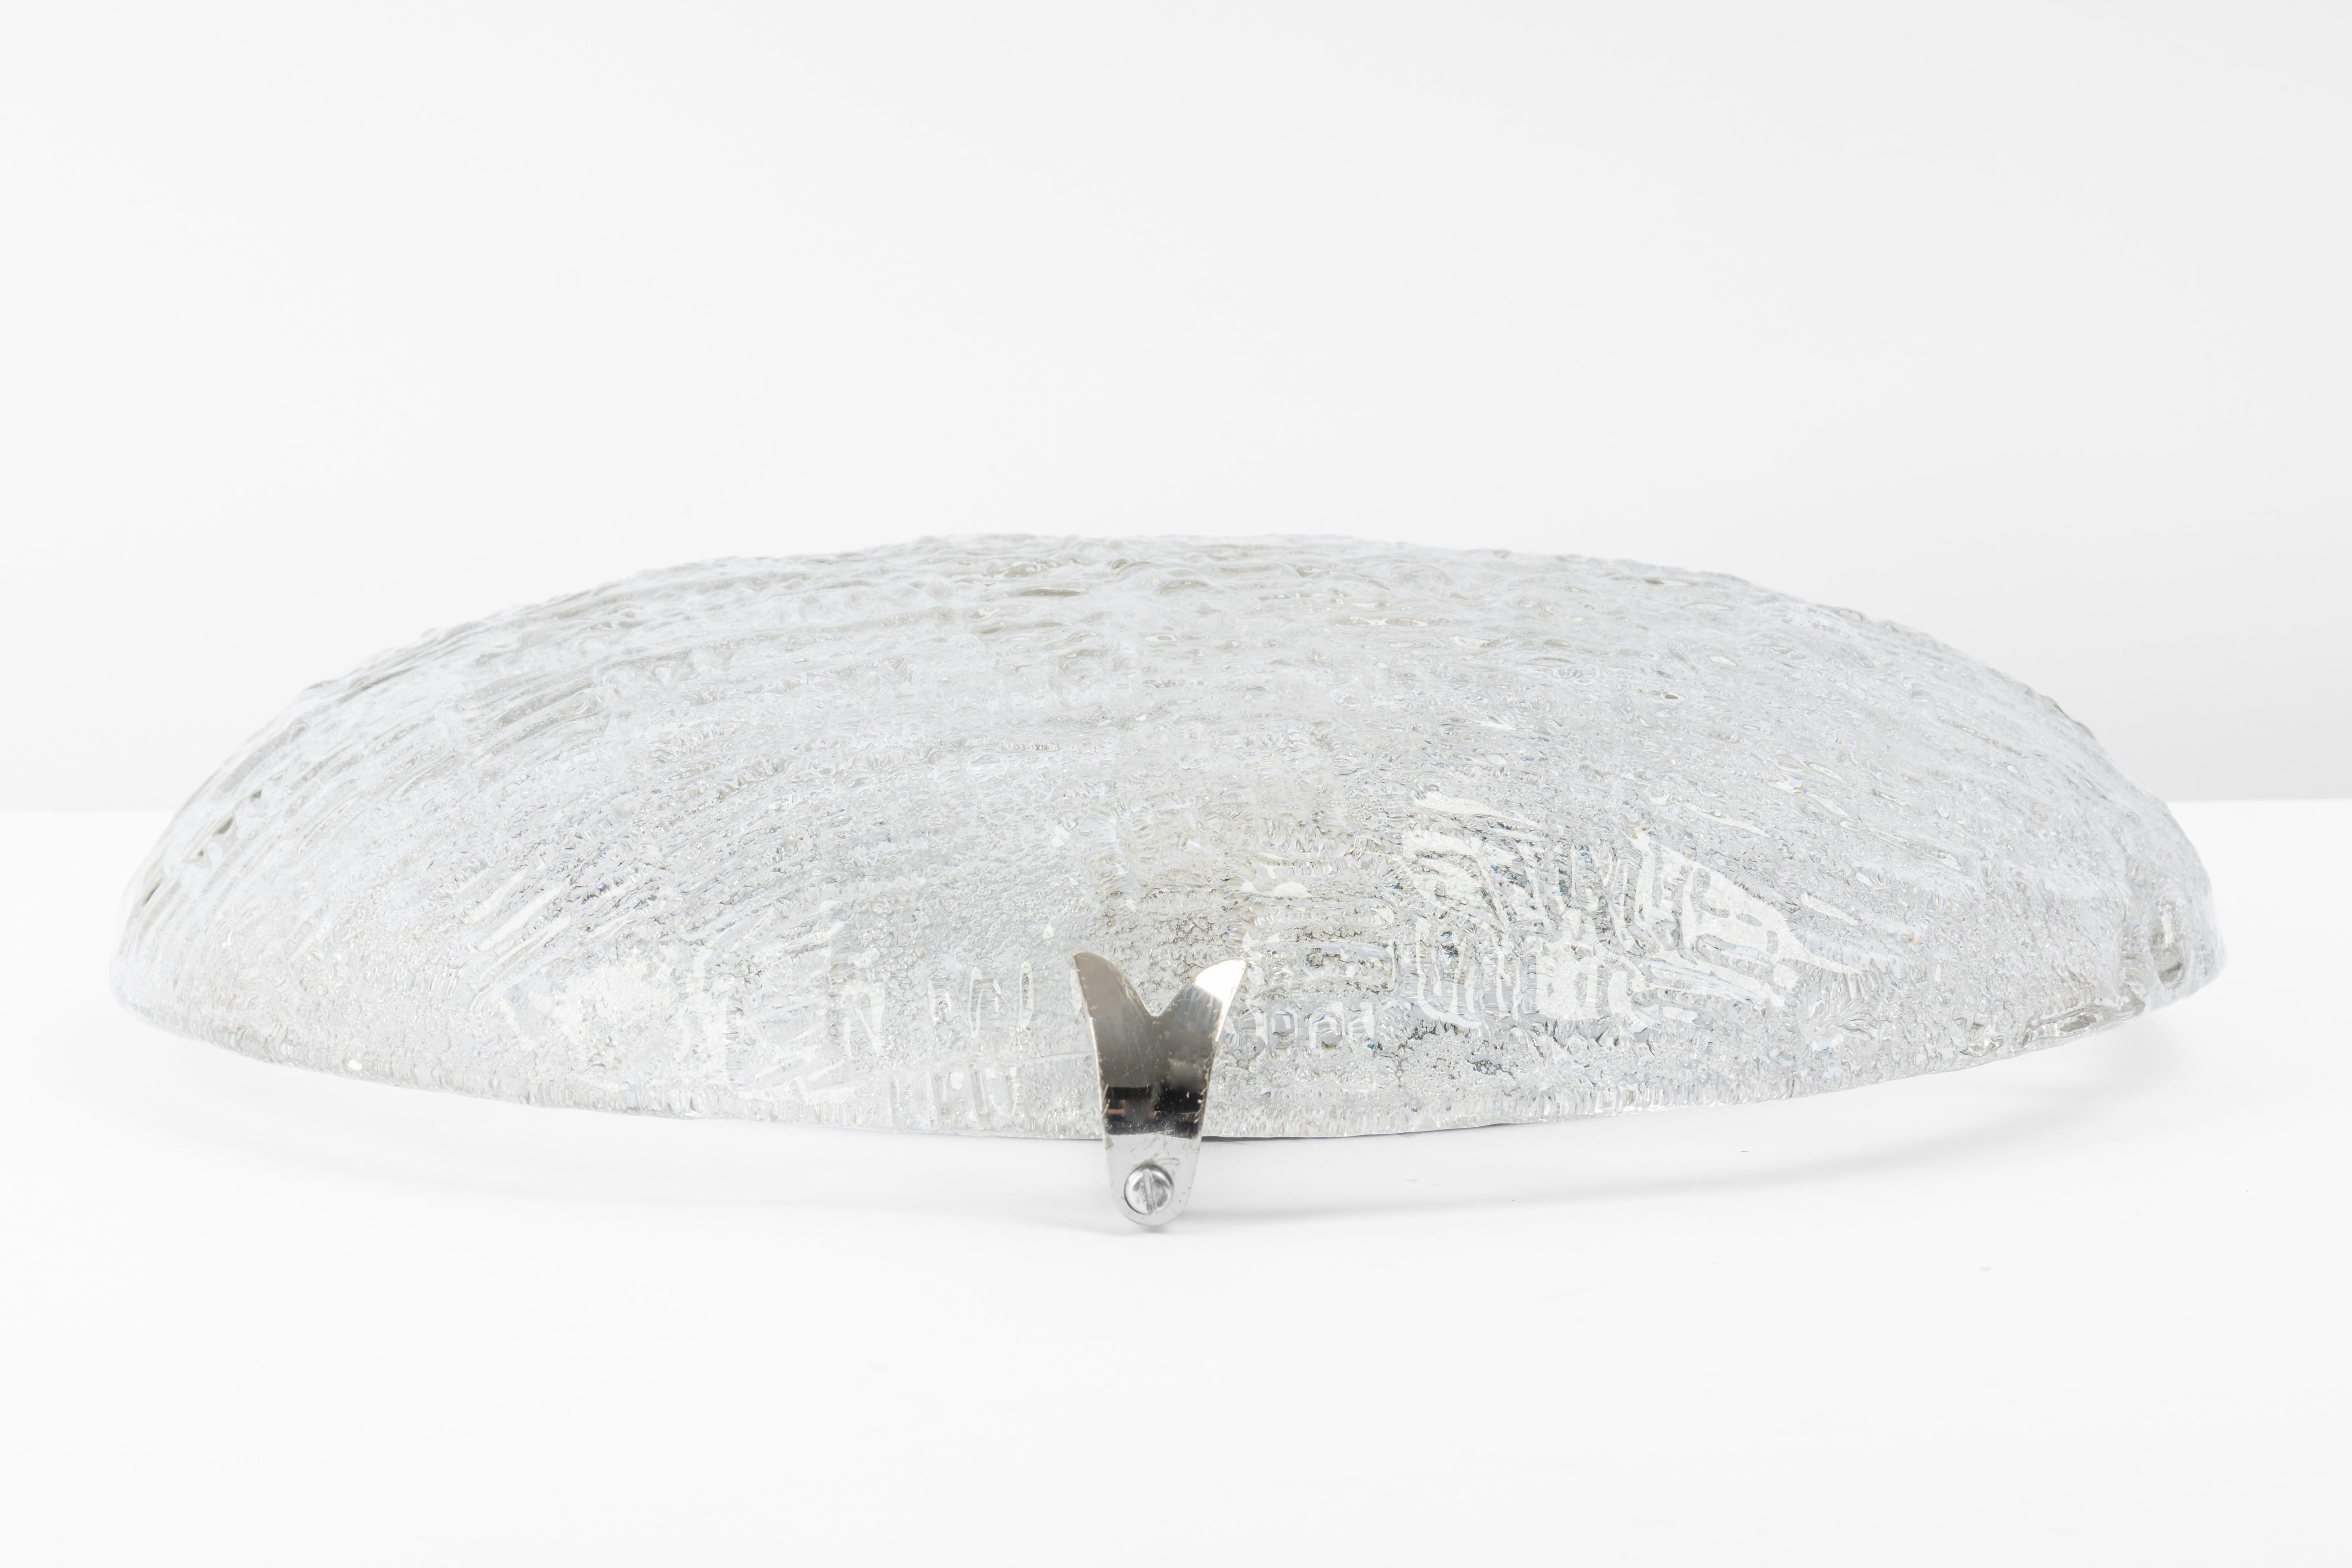 A round Murano flush mount by Hillebrand Leuchten, Germany, 1970s.
Thick-blown glass fixtured on a metal base.

Good condition. Cleaned, well-wired and ready to use. 

The fixture requires 2 x E27 Standard bulbs with 60W max each 
Light bulbs